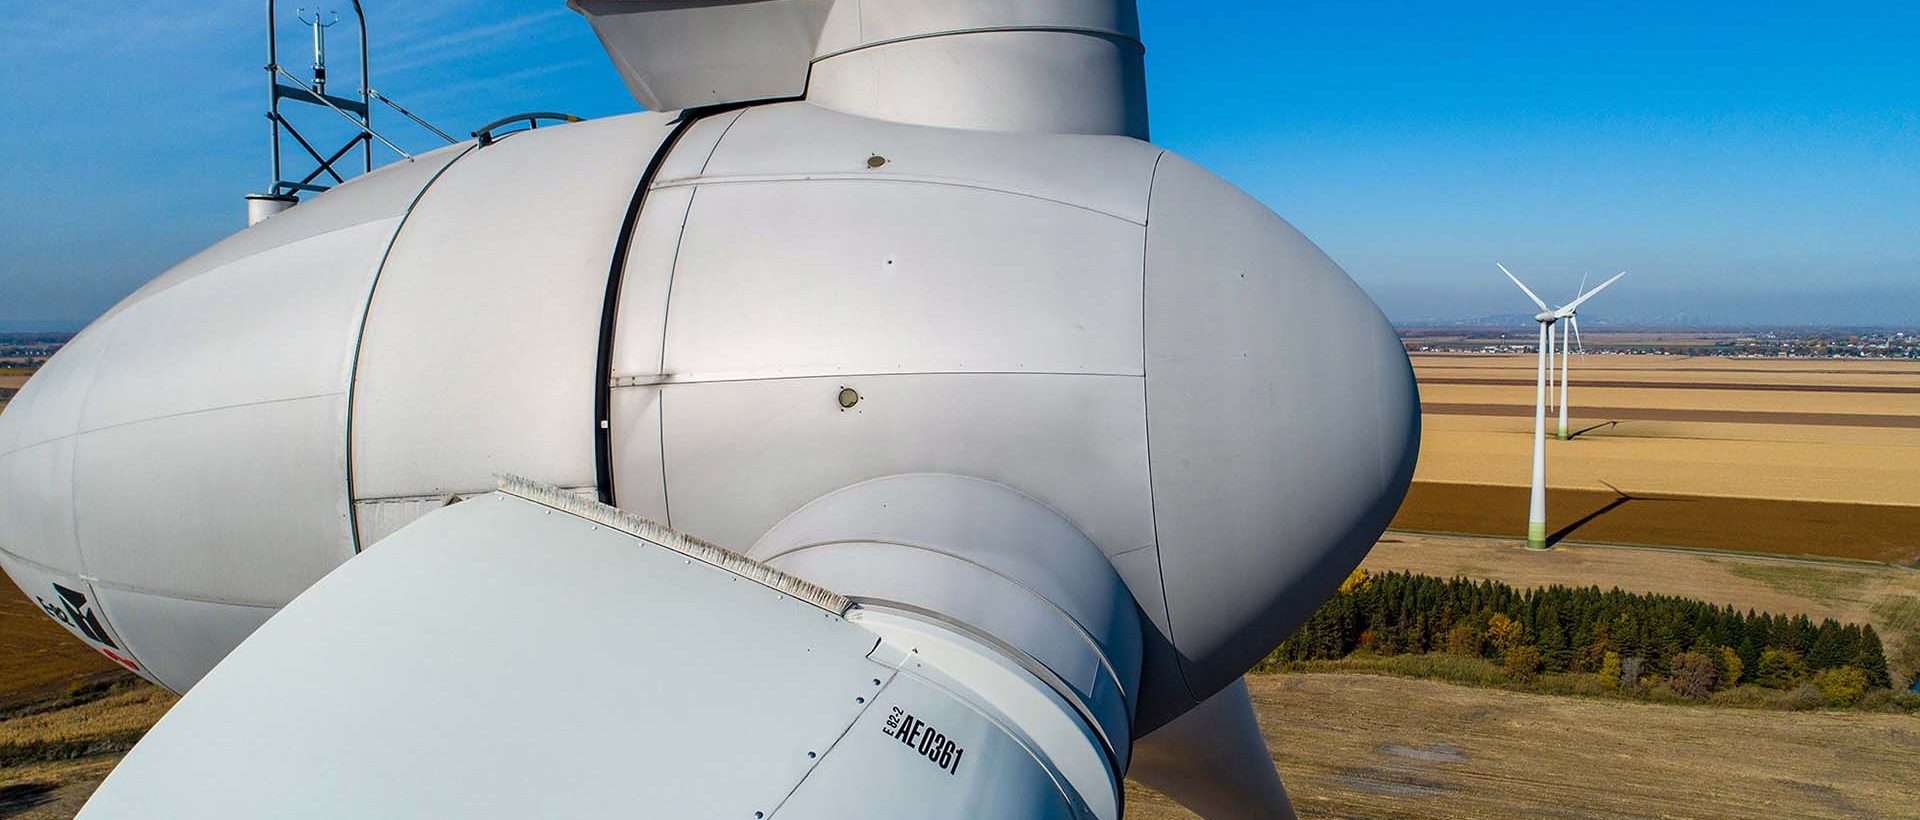 wind turbine blade inspections by drone